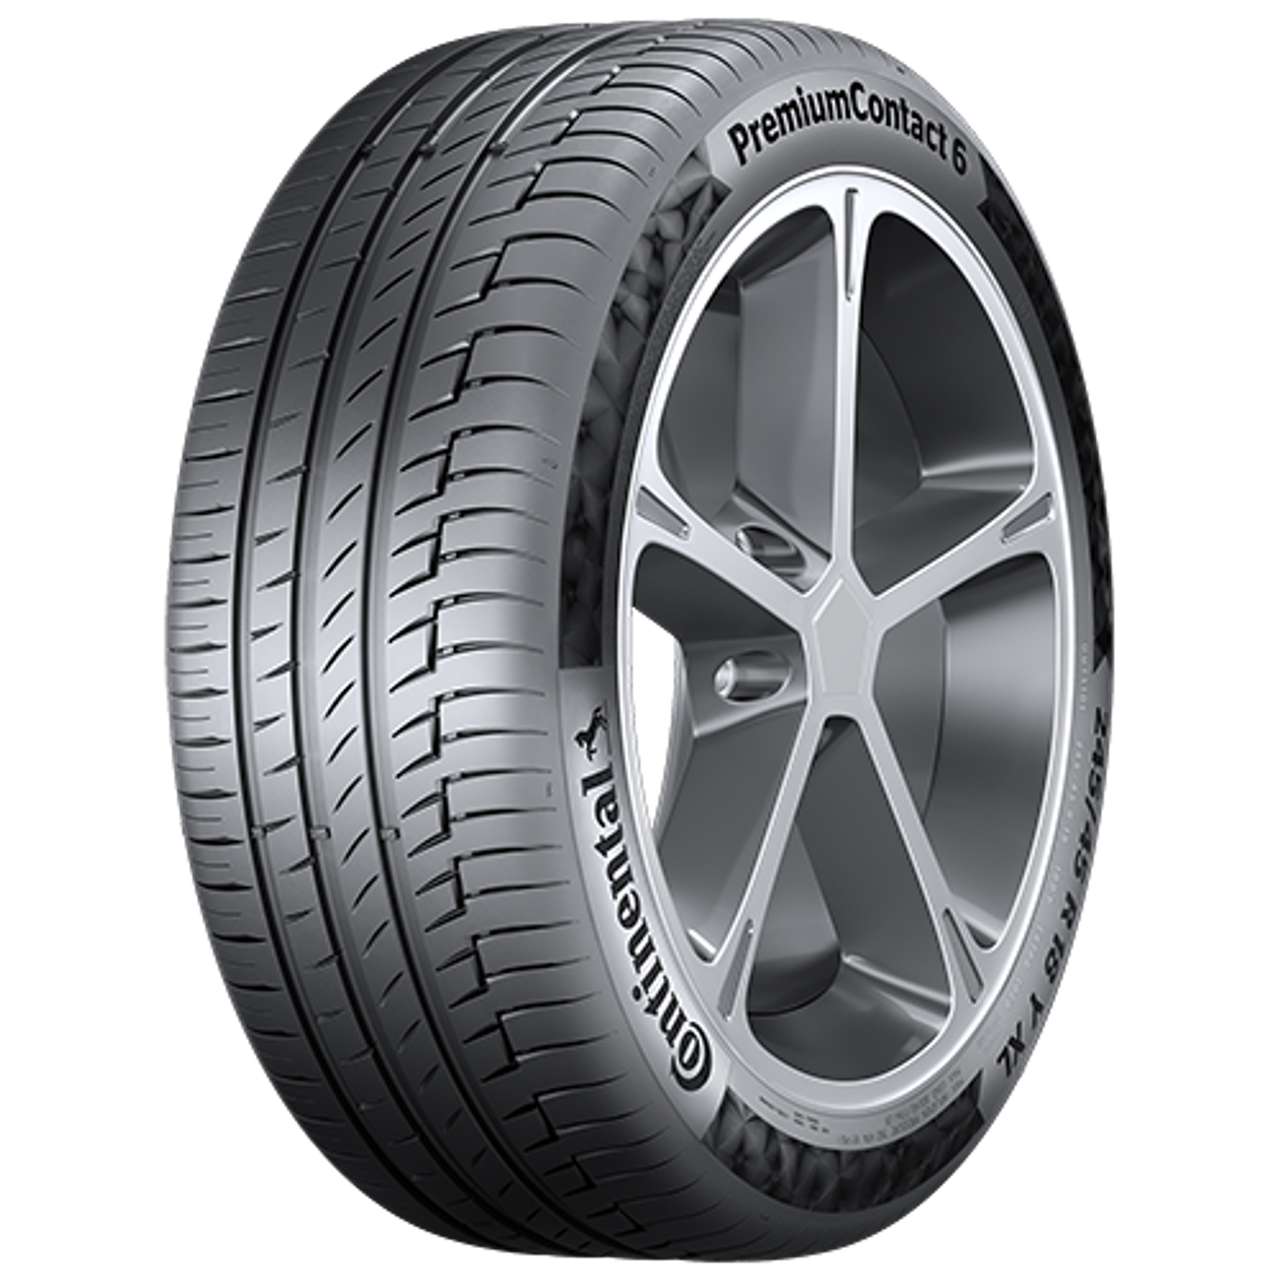 CONTINENTAL PREMIUMCONTACT 6 (*) (EVc) SSR 275/40R22 107Y BSW